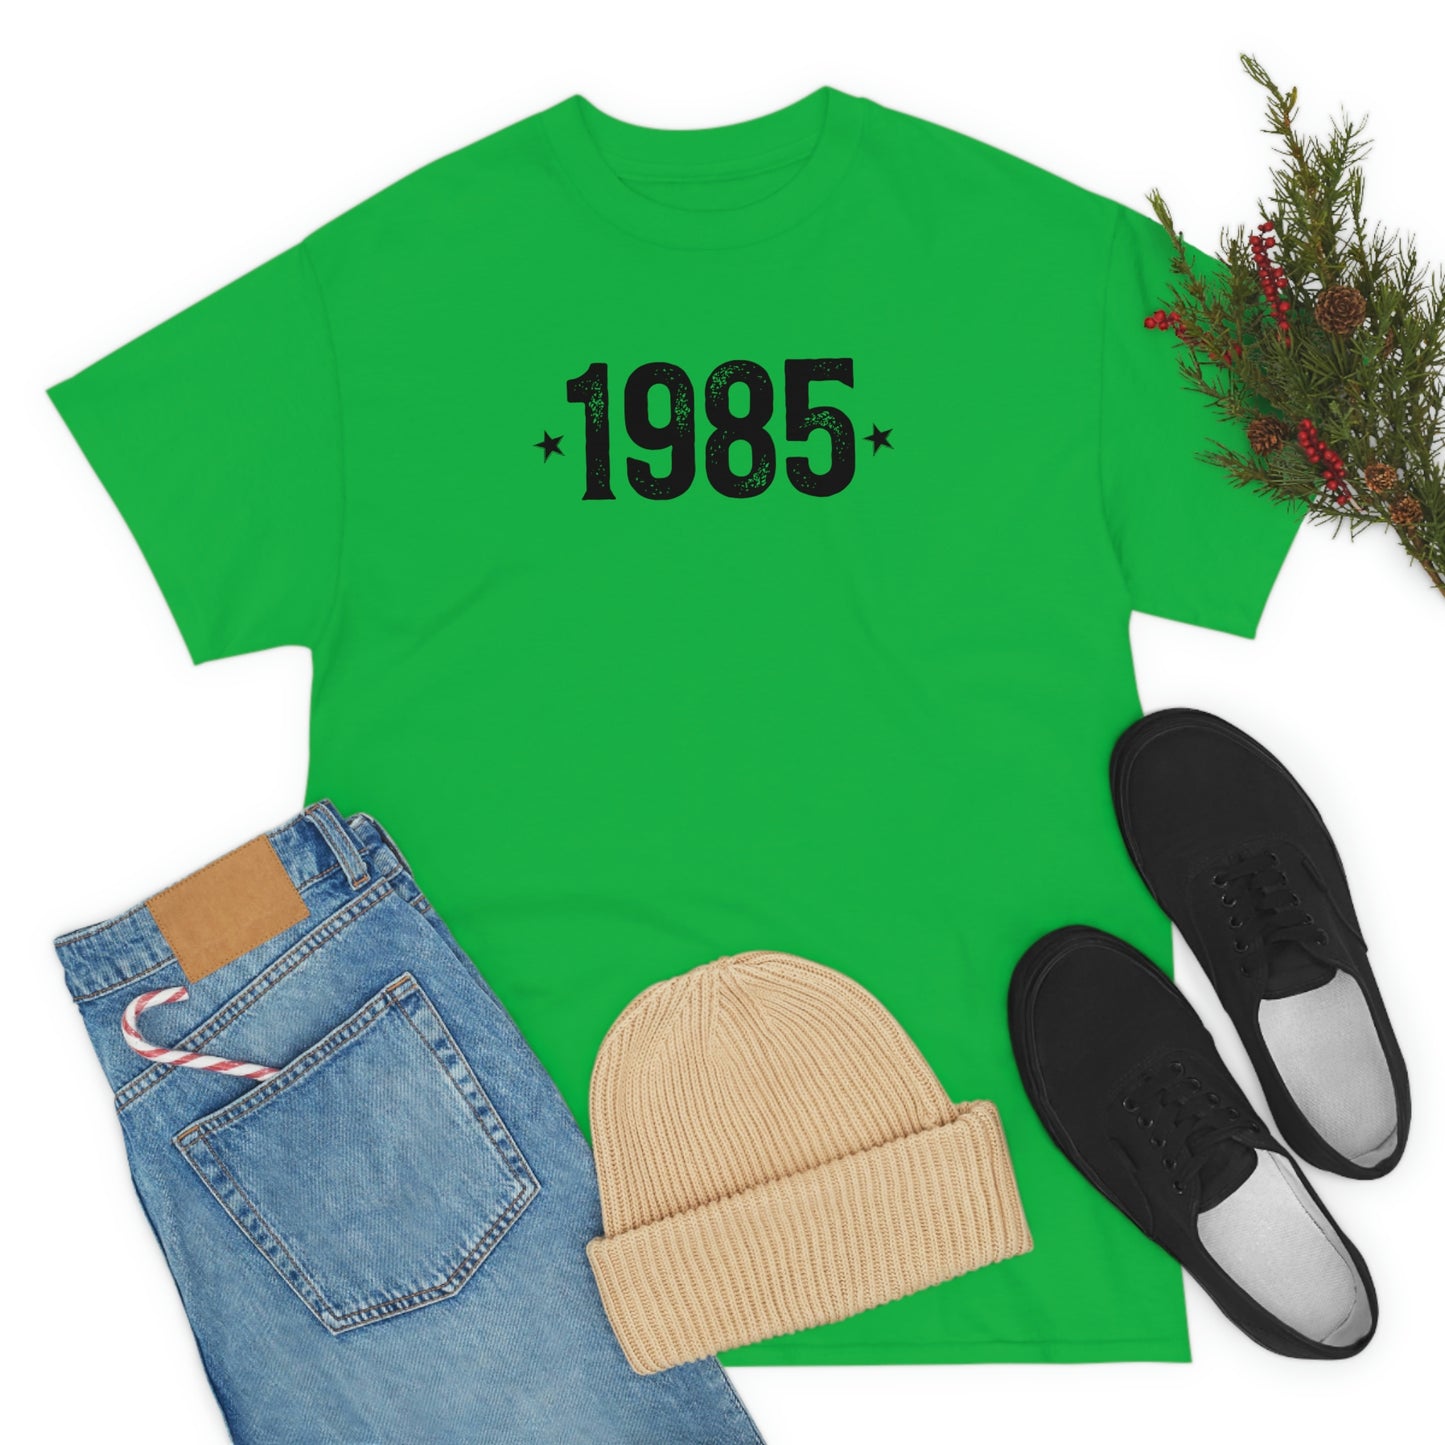 Stylish 1985 year t-shirt, a must-have for vintage fashion enthusiasts